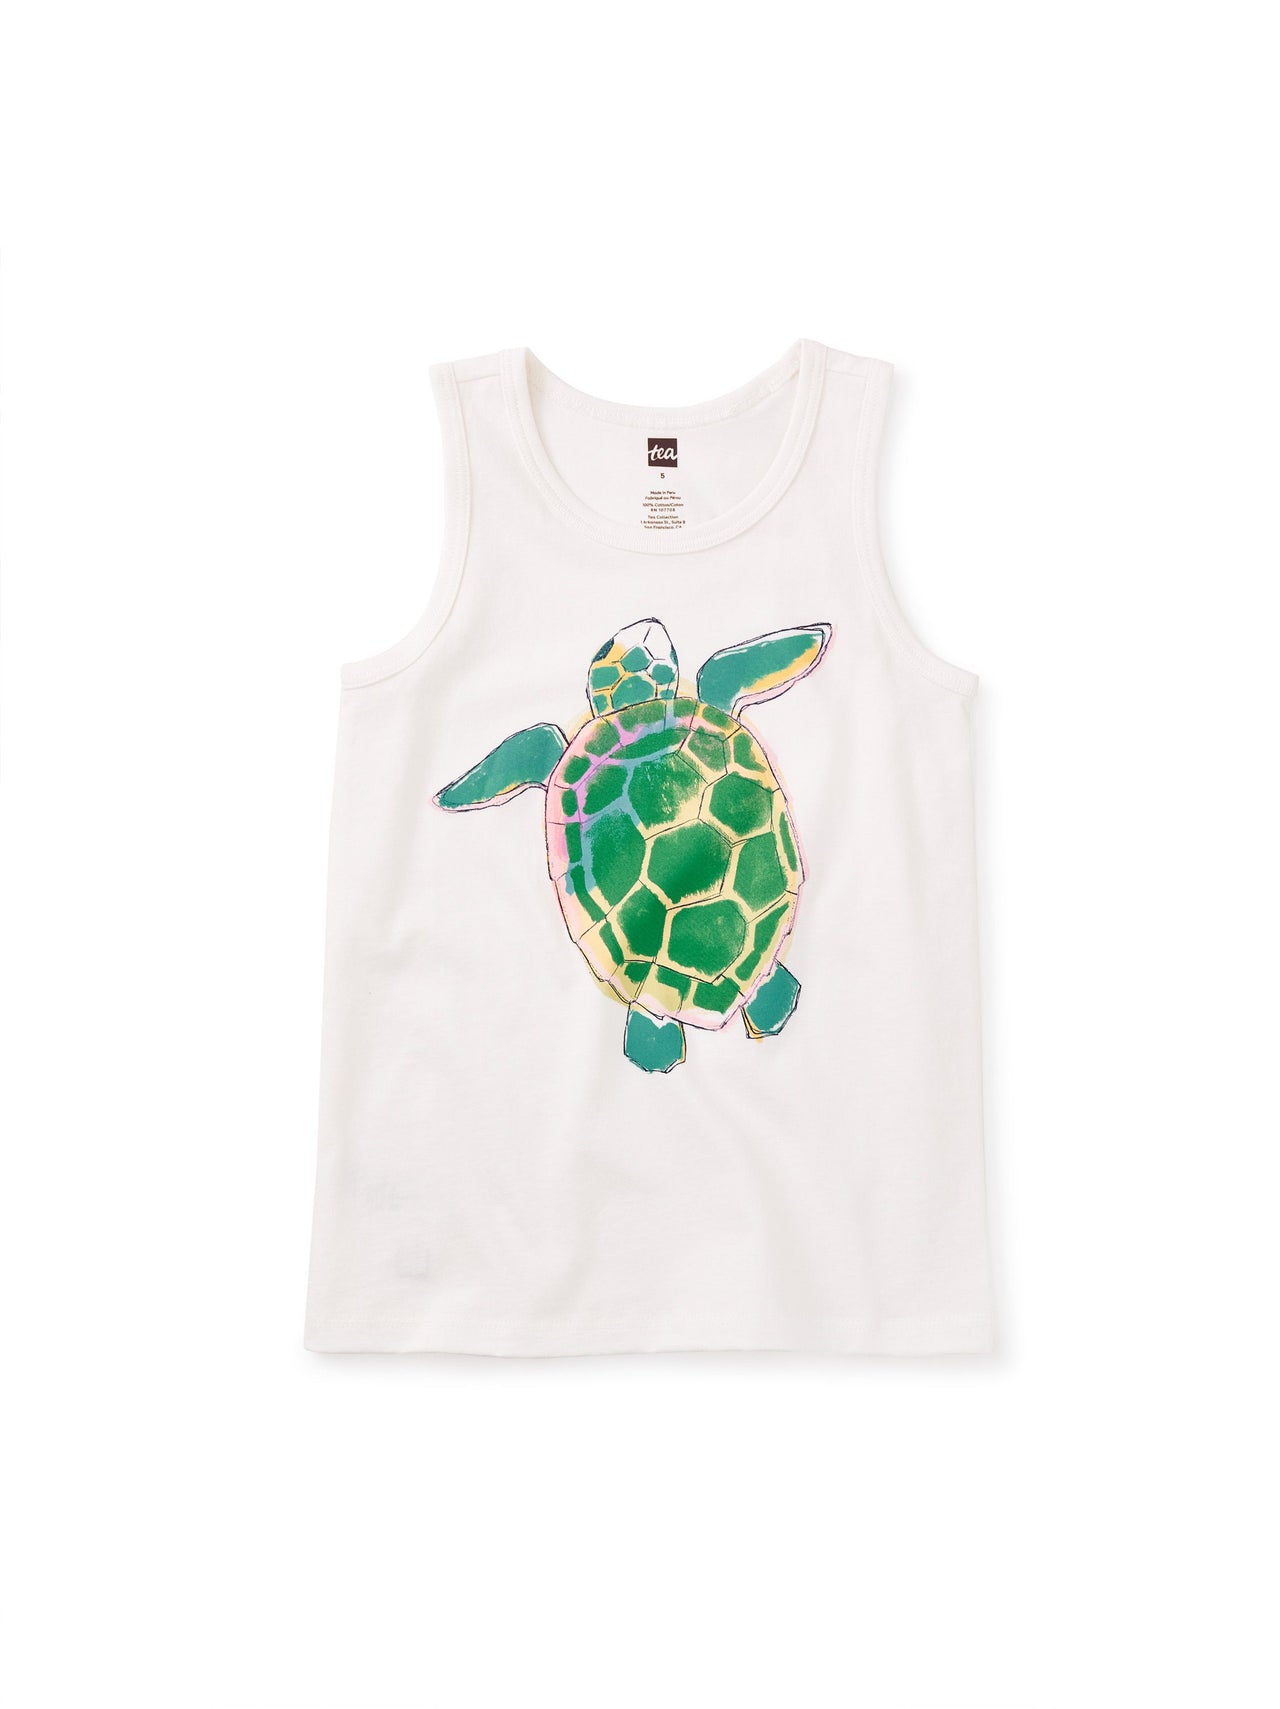 Tortuga Tails Graphic Tank